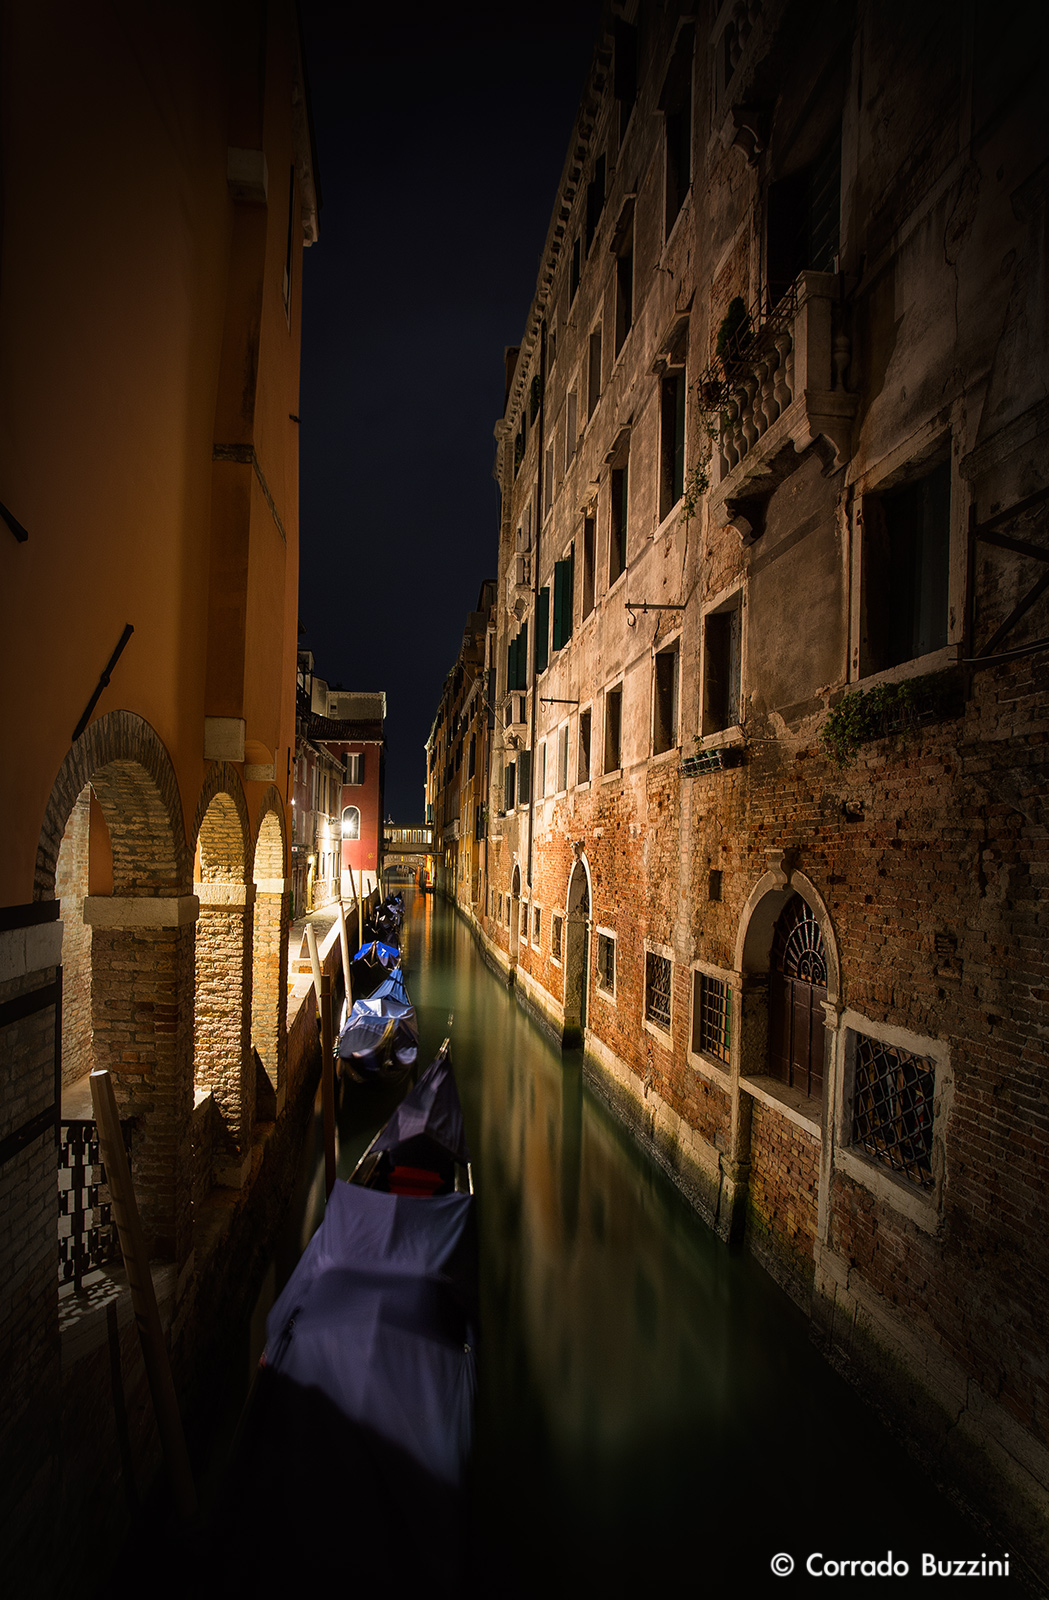 One of Venice's many canals...